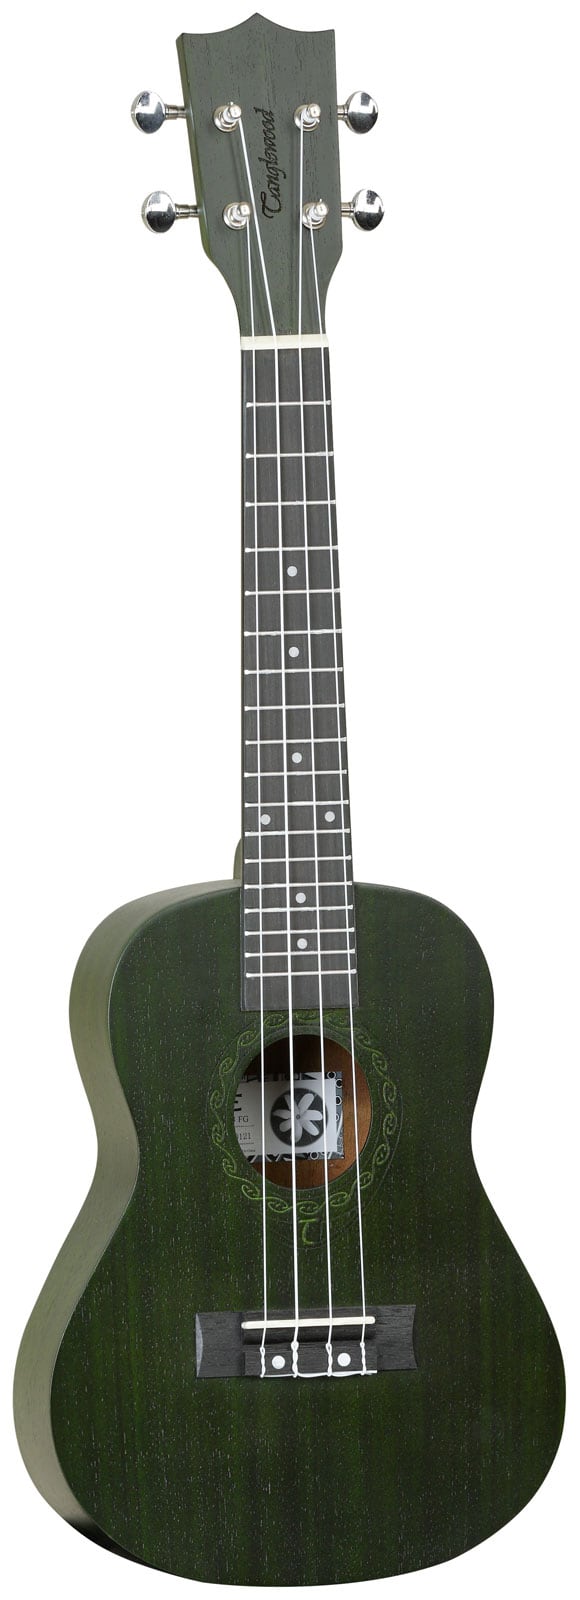 TANGLEWOOD TIARE CLASSICAL TWT 3 FG CONCERT FOREST GREEN SATIN